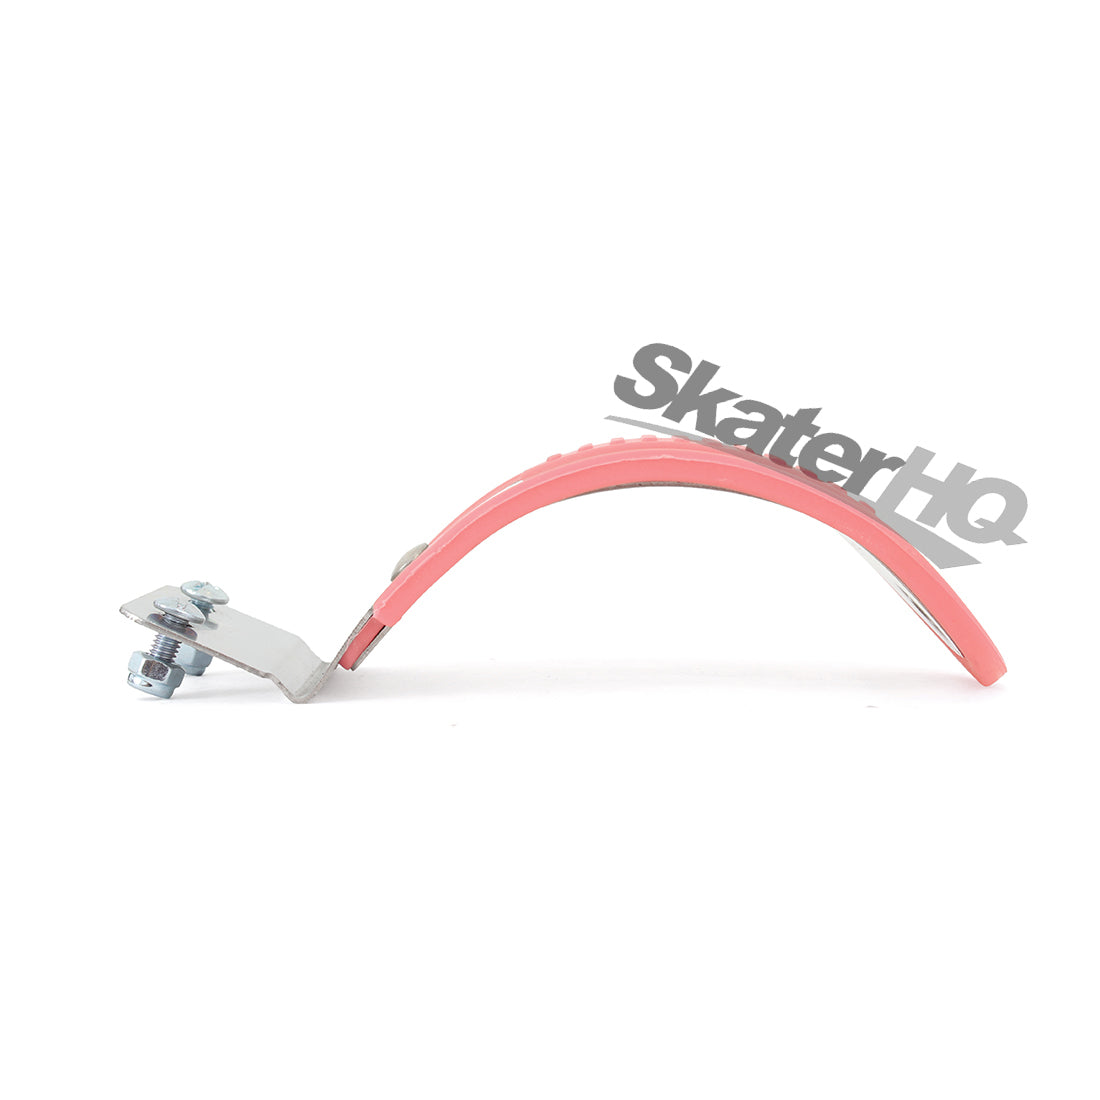 Micro Maxi Deluxe Brake 4624 - Coral (for Mint) Scooter Hardware and Parts